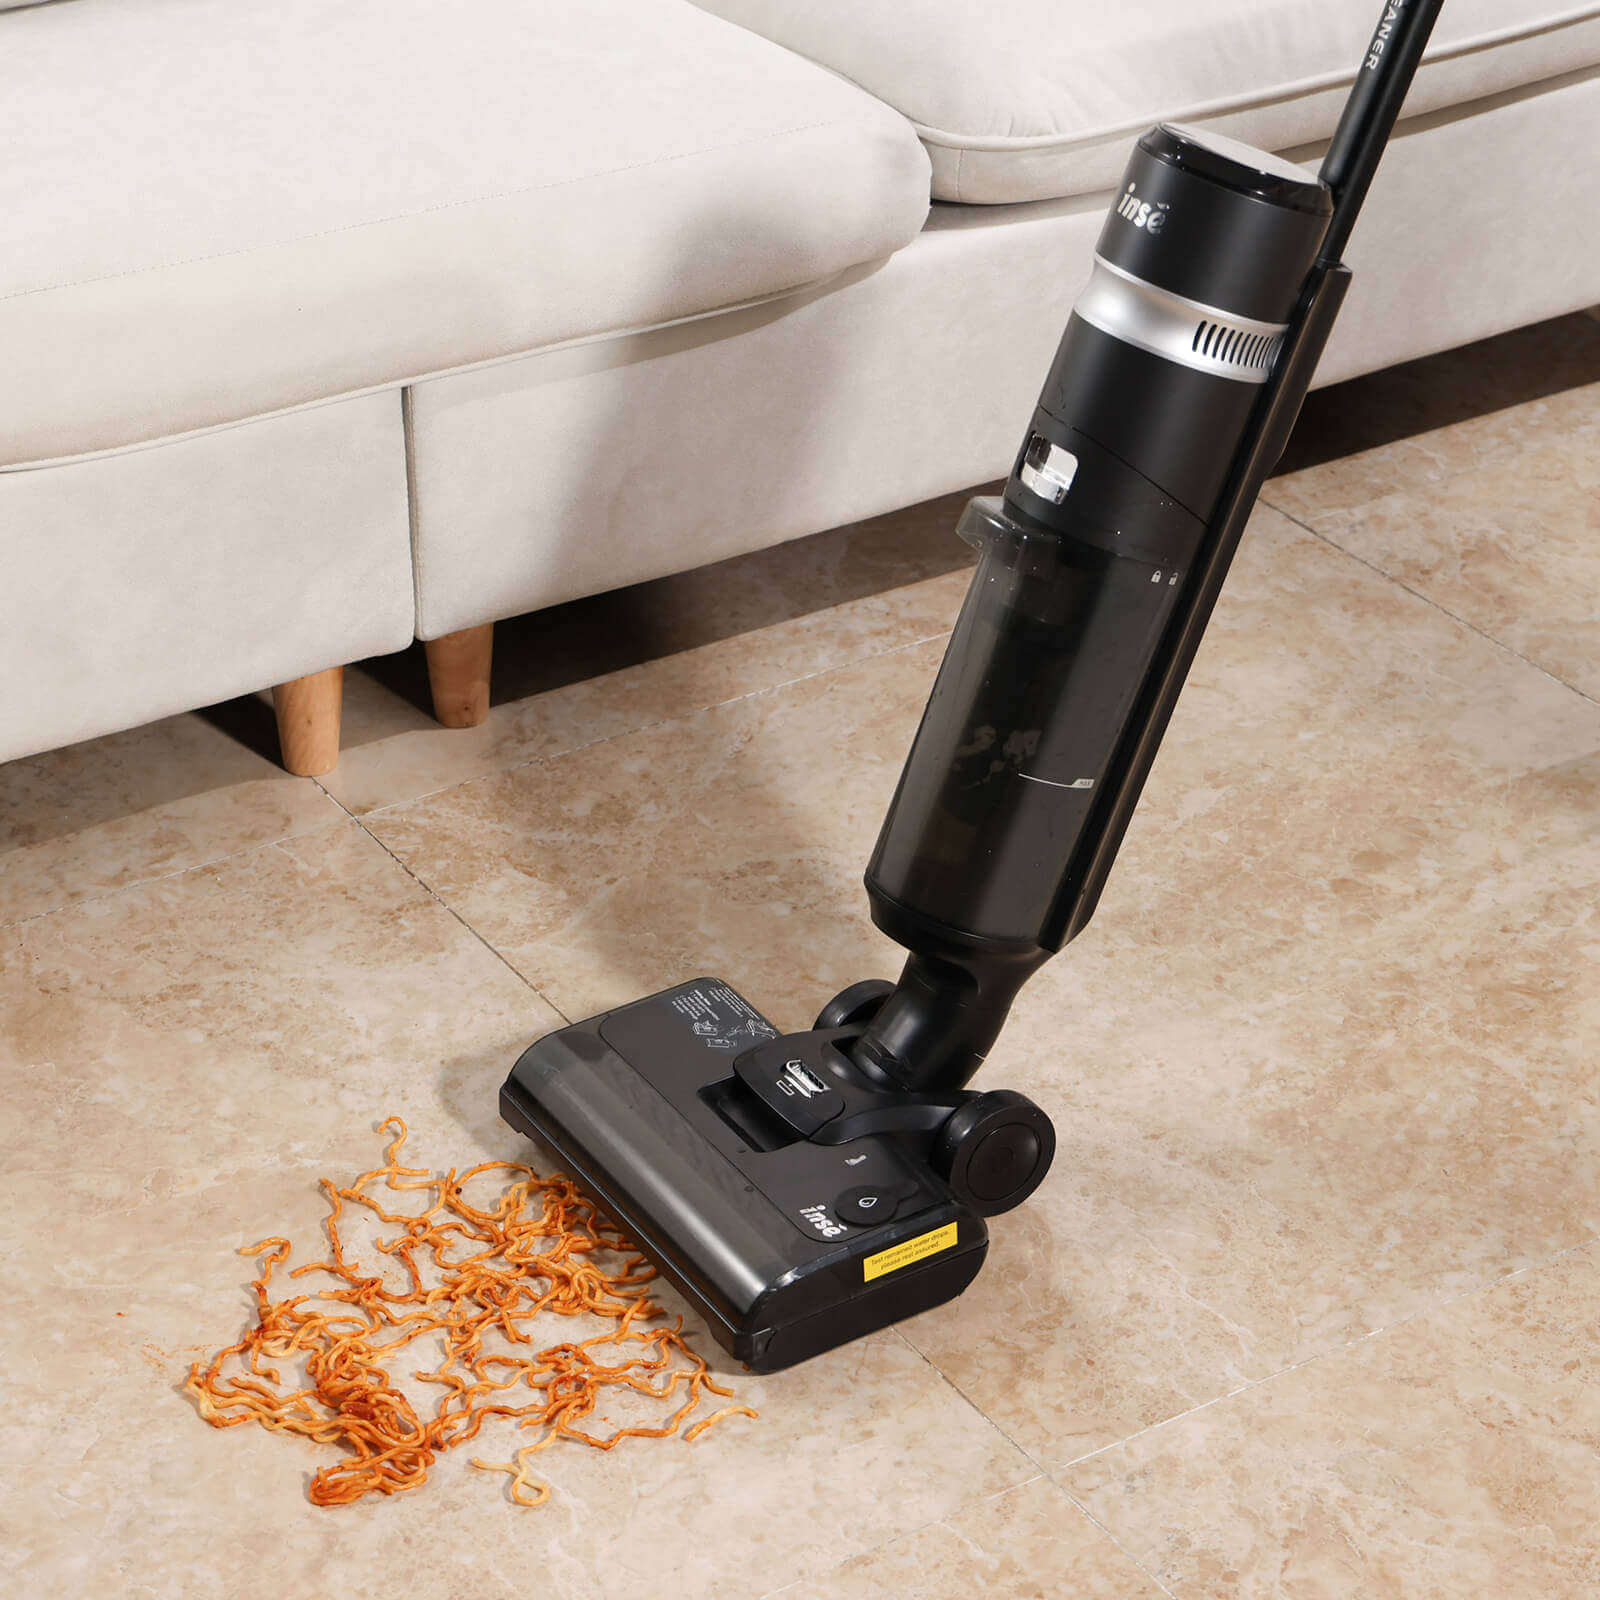 INSE W5 Cordless Wet Dry Vacuum Cleaner clean noodles-inselife.com